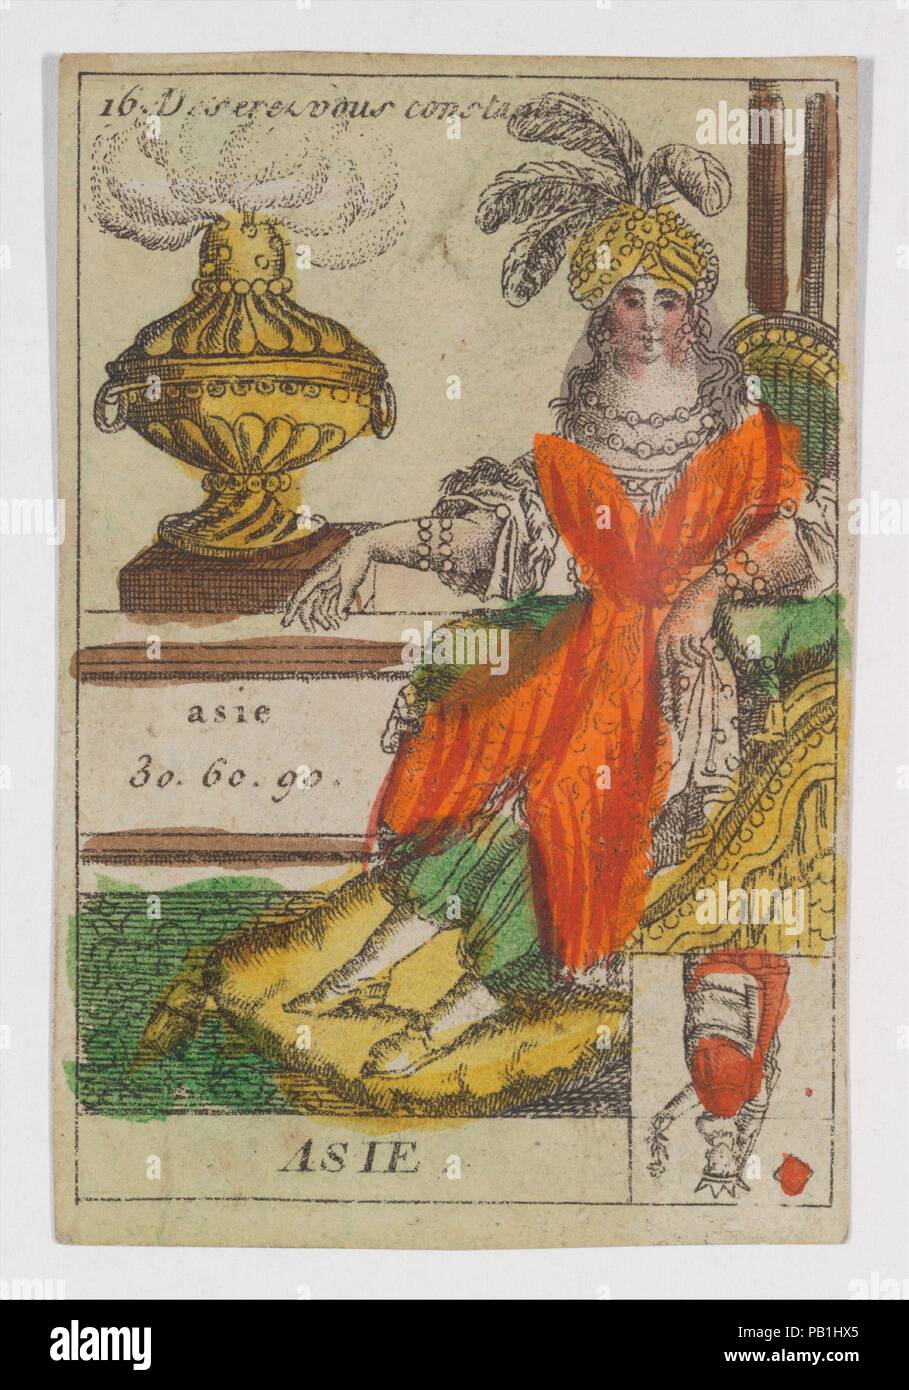 Asie from Playing Cards (for Quartets) 'Costumes des Peuples Étrangers'. Artist: Anonymous, French, 18th century. Dimensions: 3 3/16 × 2 1/16 in. (8.1 × 5.3 cm). Date: 1700-1799. Museum: Metropolitan Museum of Art, New York, USA. Stock Photo